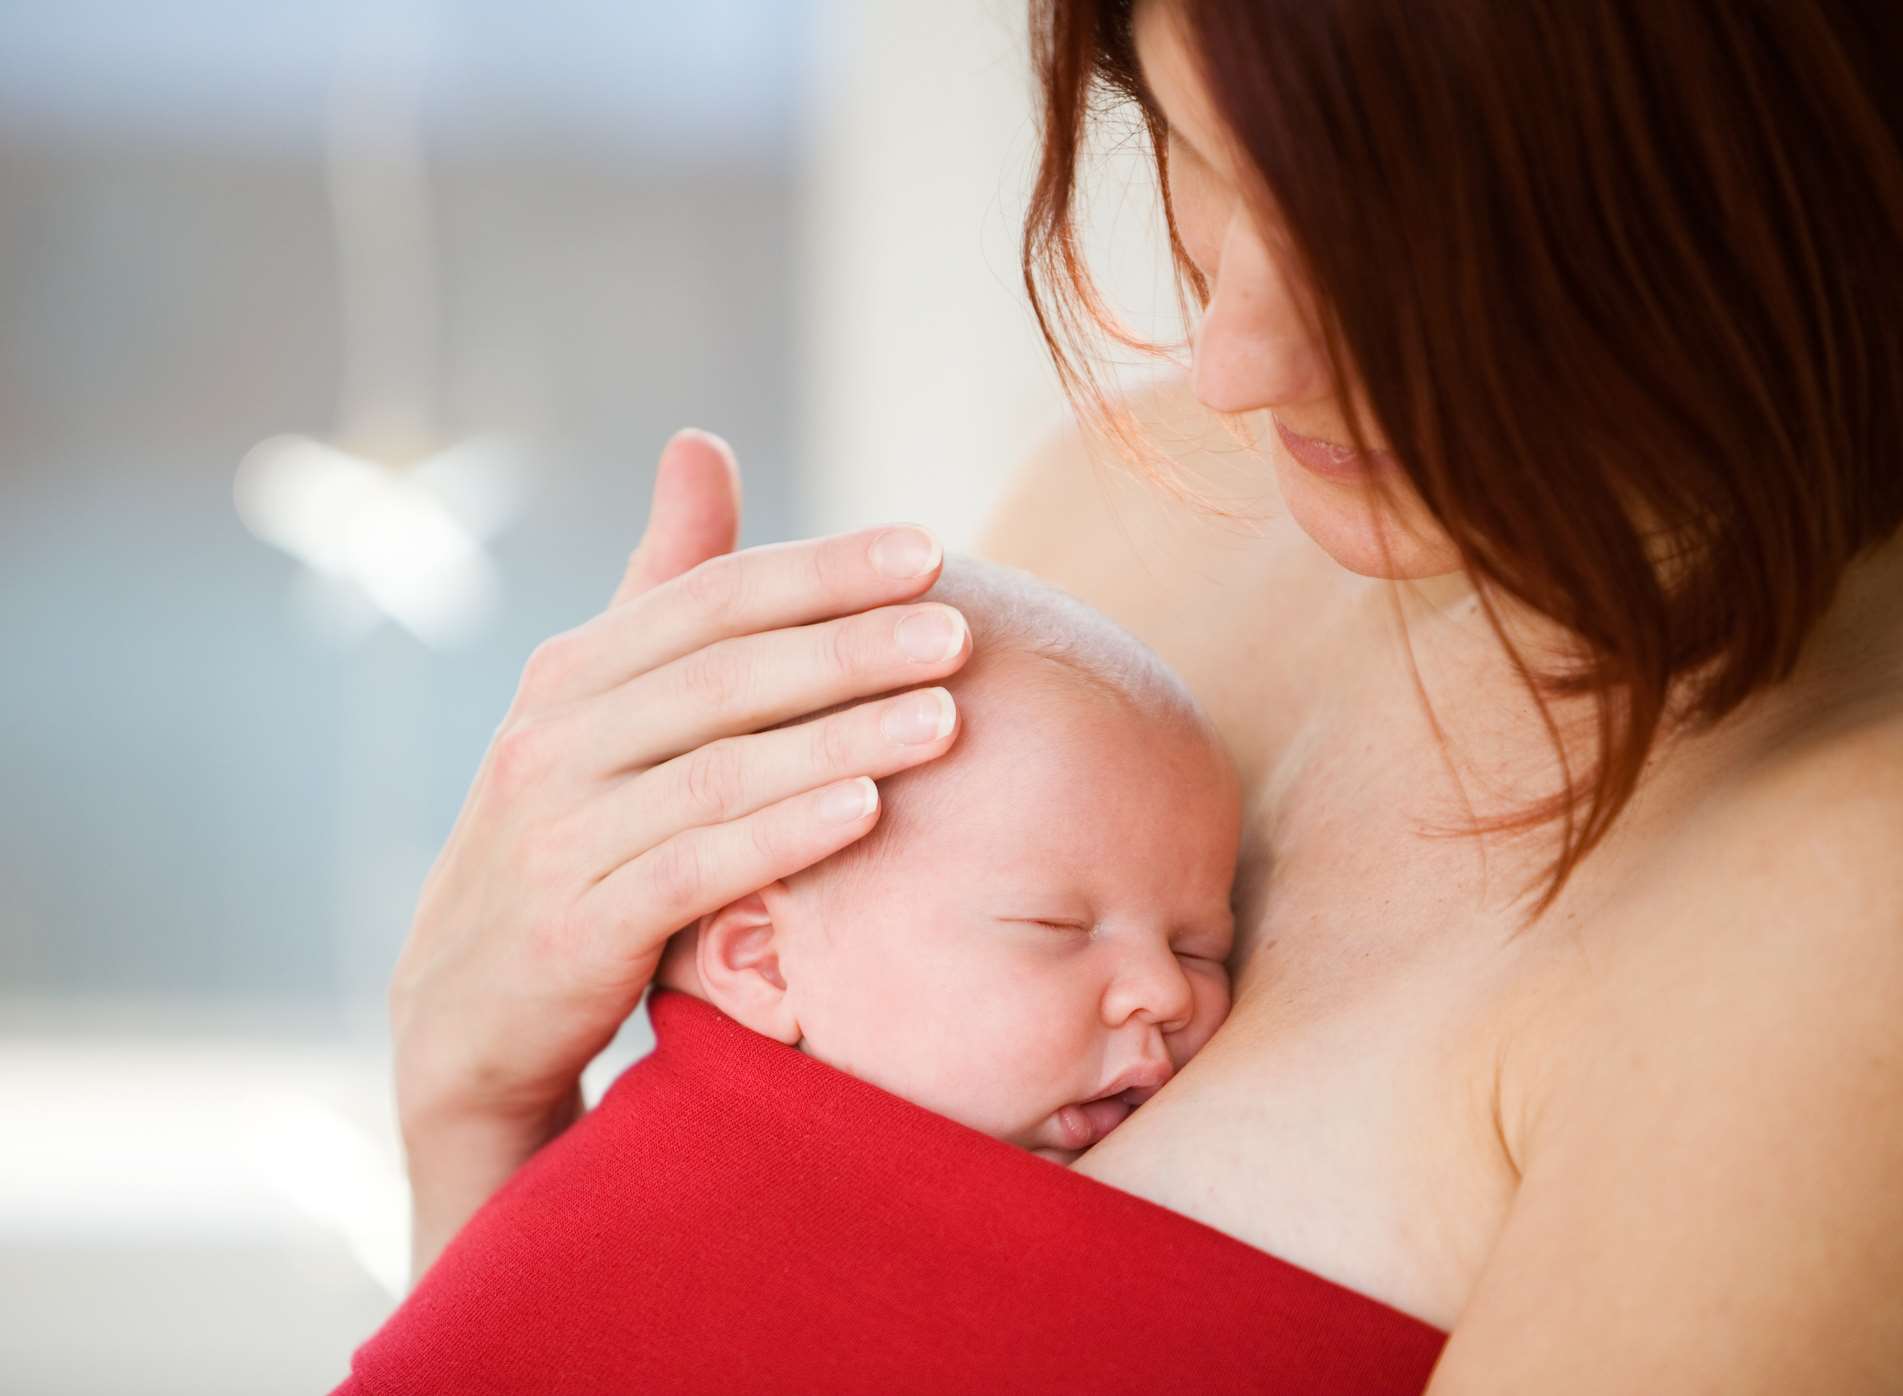 Skin to skin time can have big benefits for mum - and baby